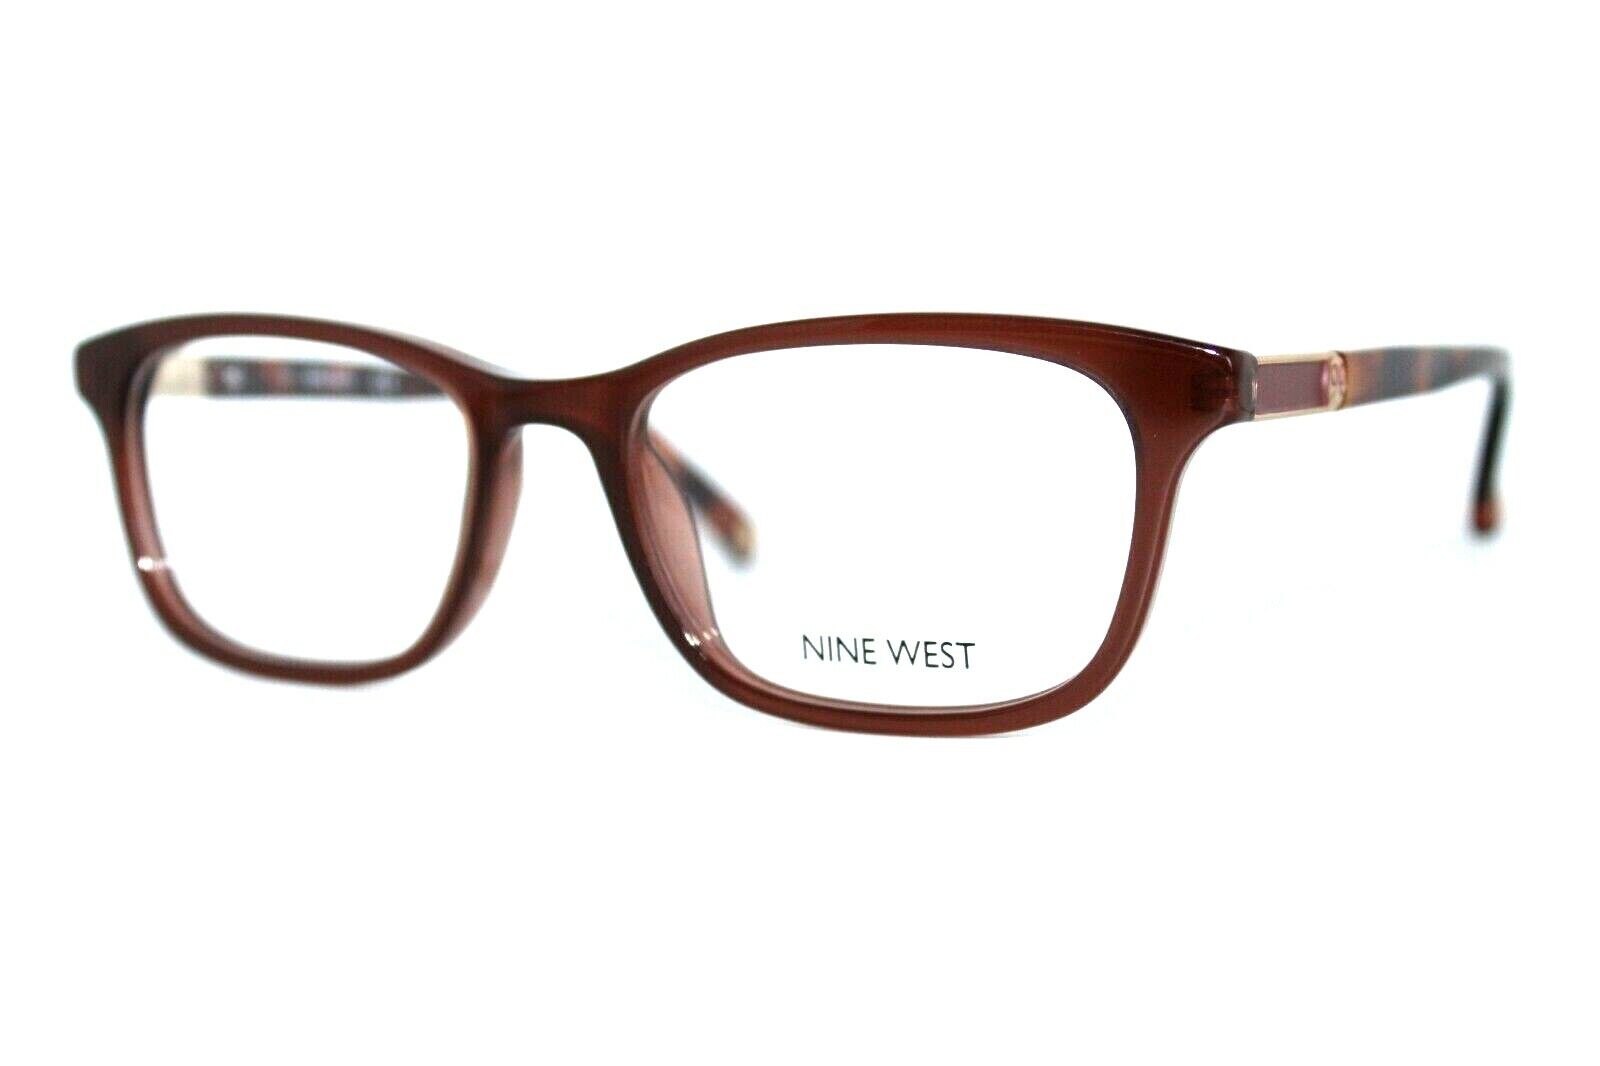 NEW NINE WEST NW5142 210 BROWN AUTHENTIC EYEGLASSES FRAMES 51-17-135MM W/CASE